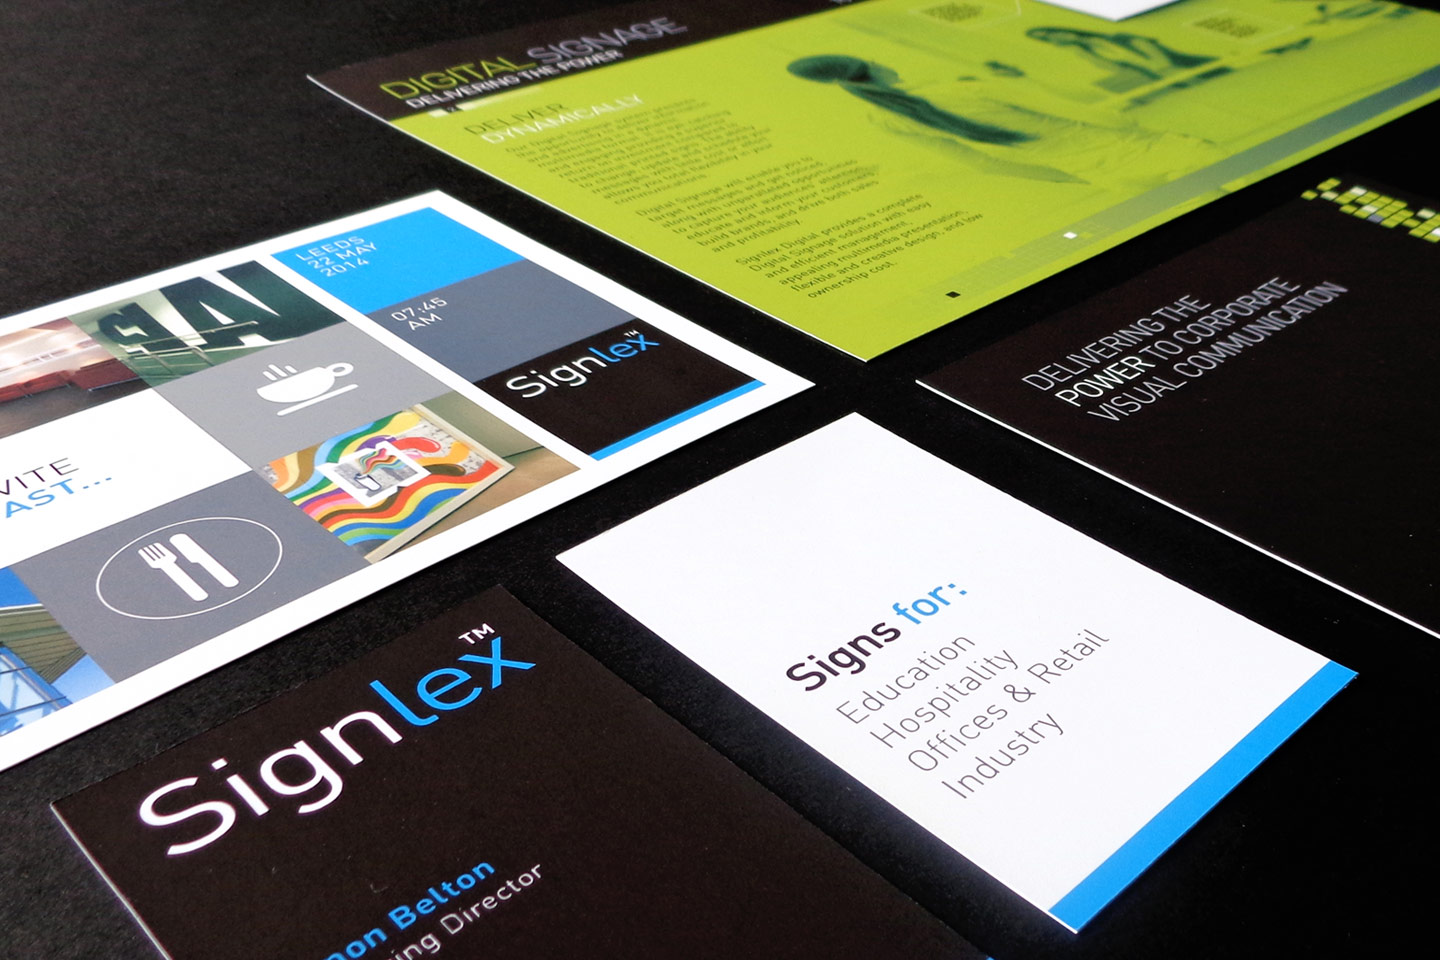 Company literature and stationery design